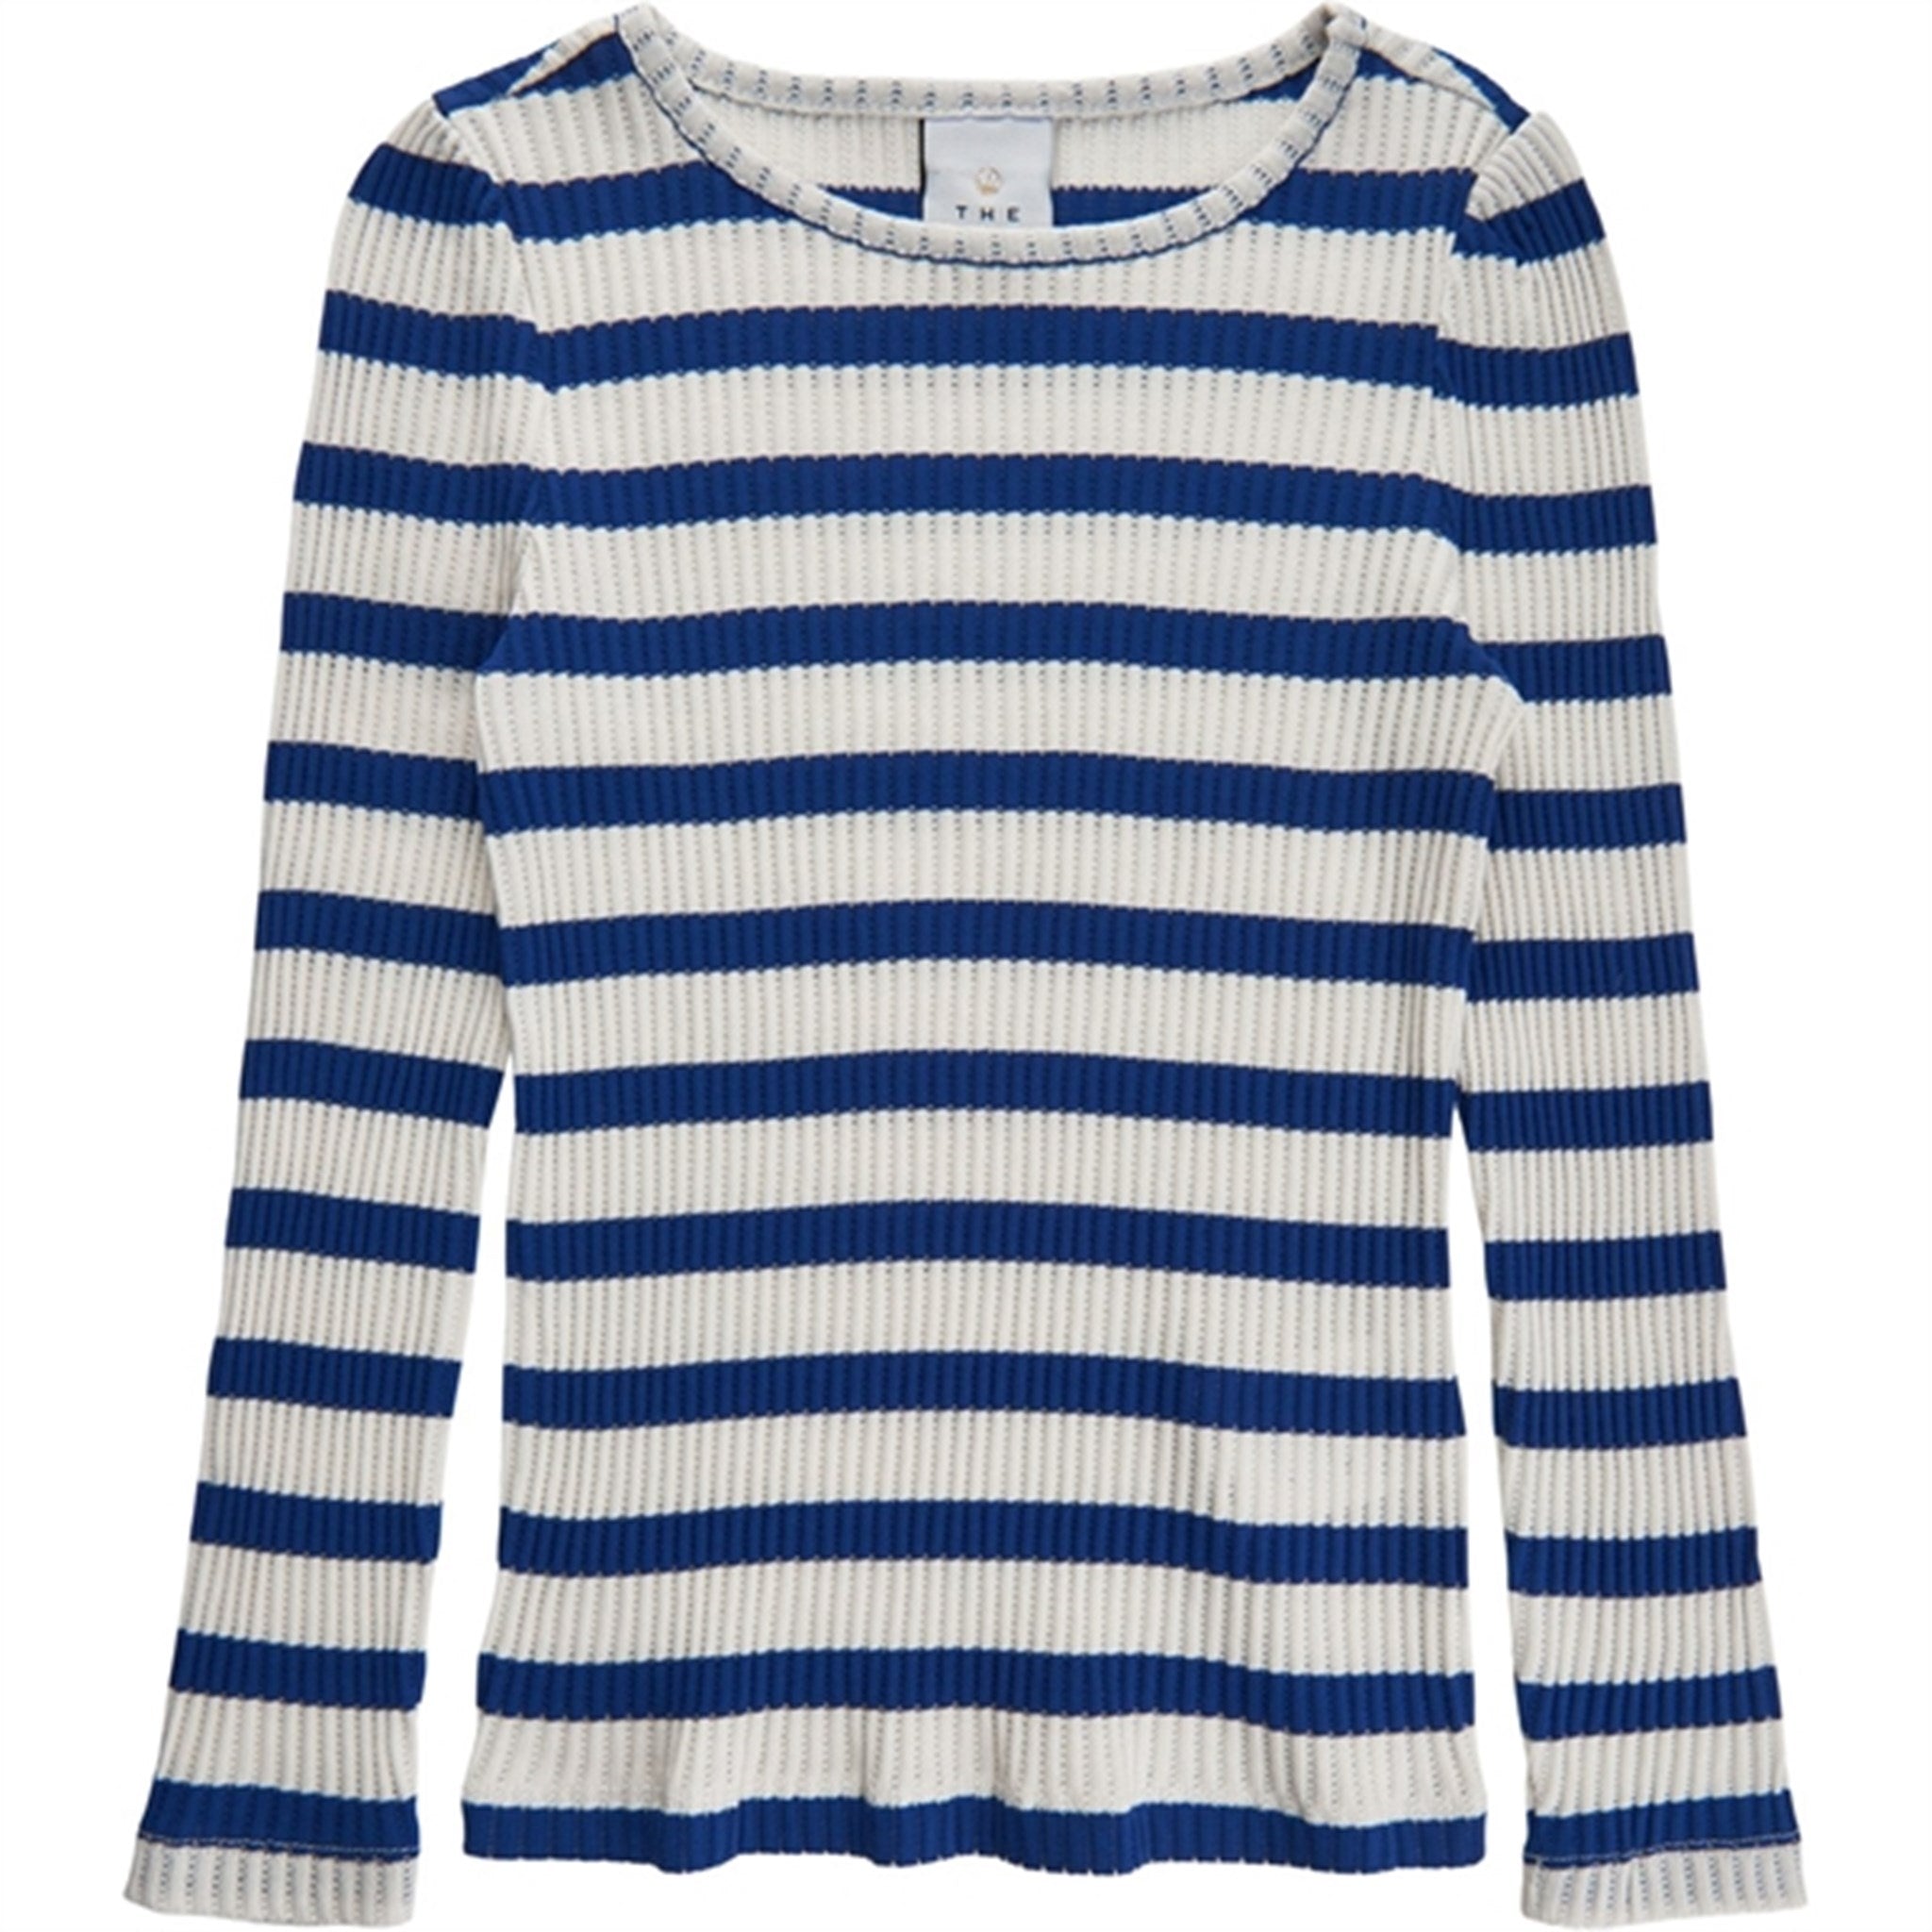 THE NEW White Swan/Limoges Striped Bluse